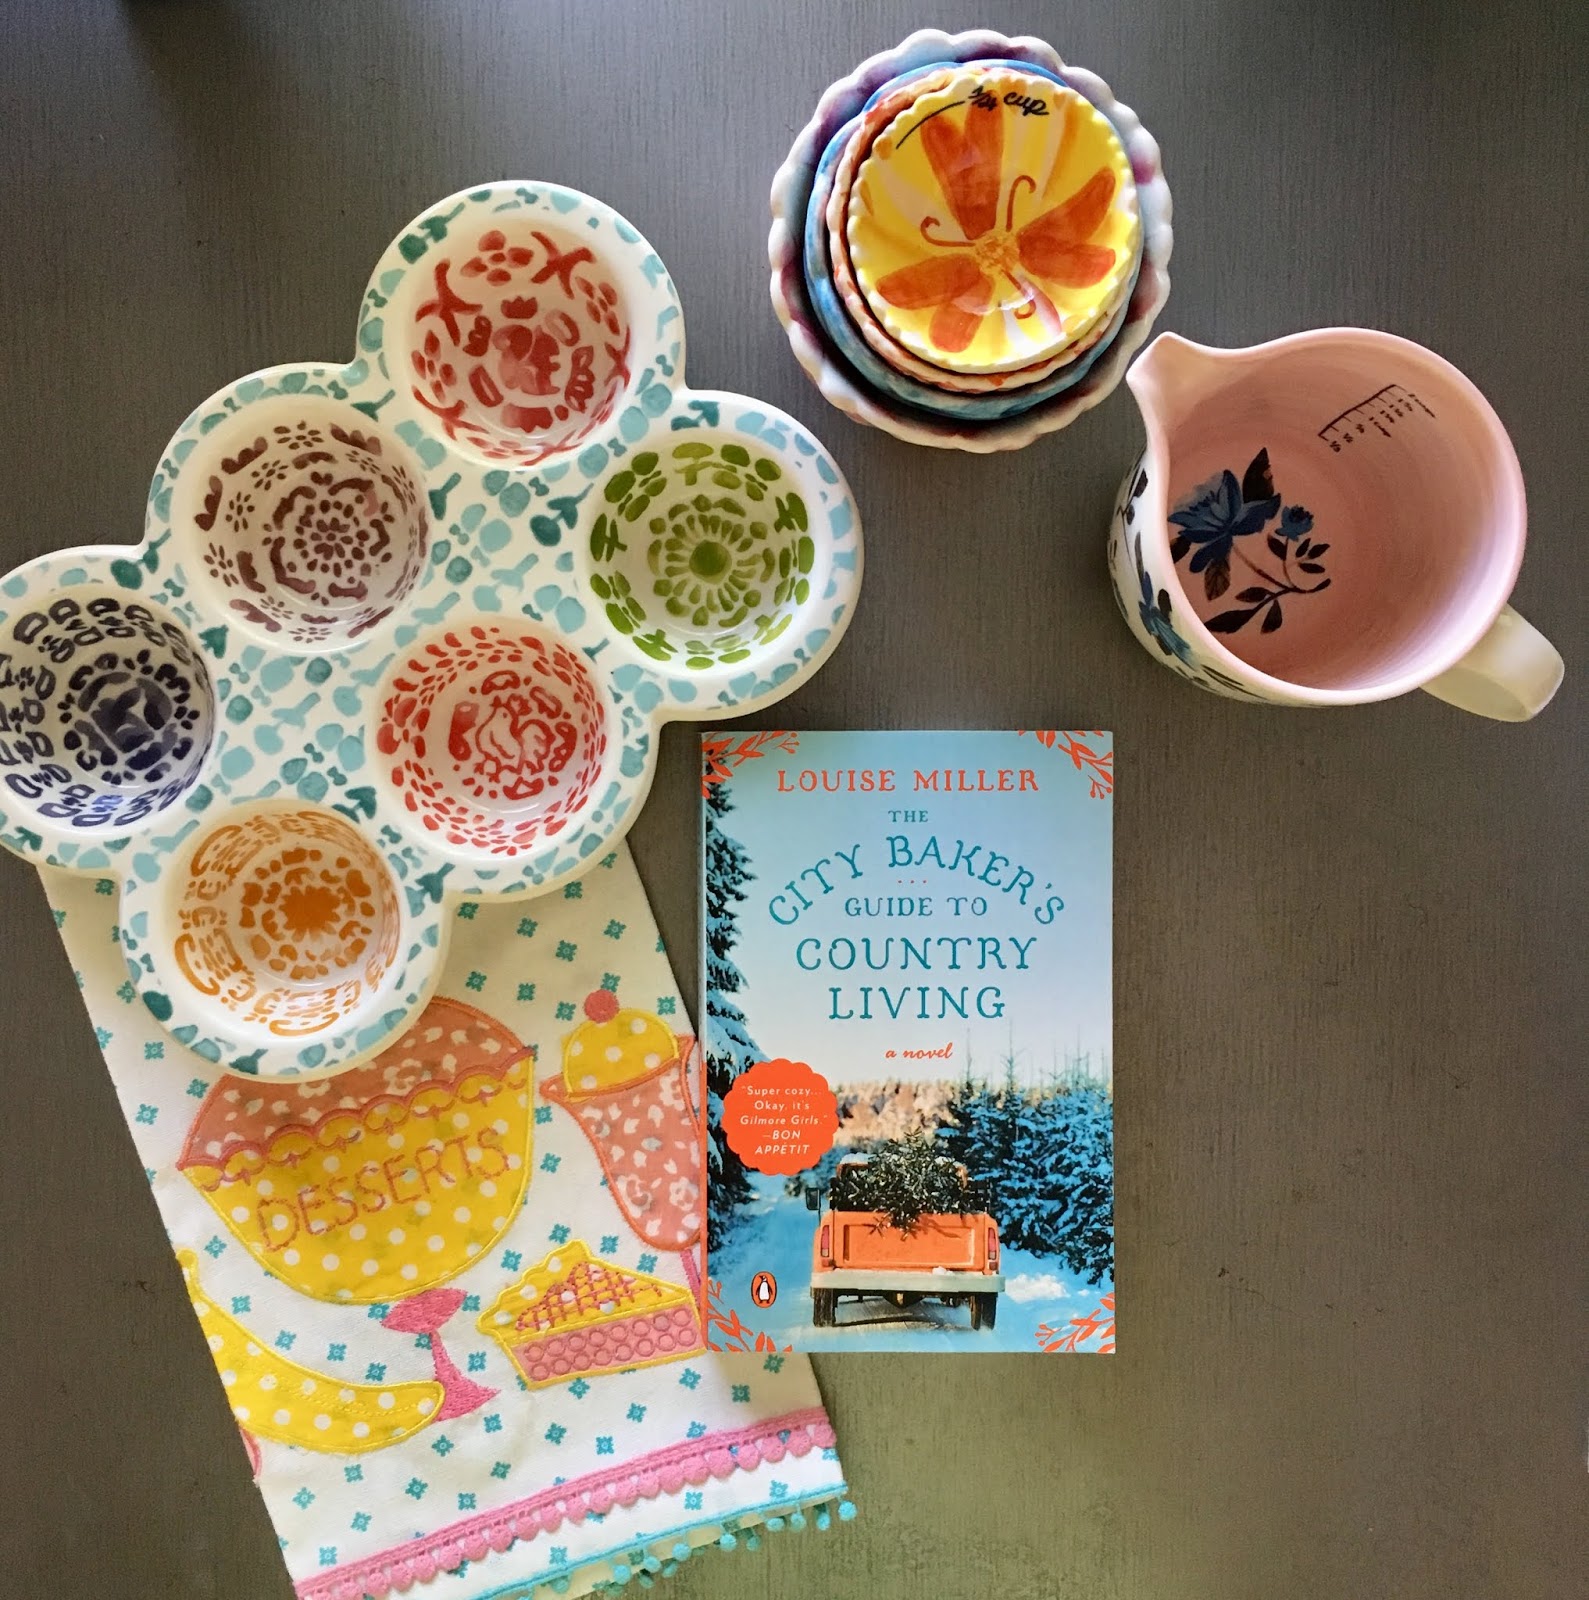 Book Review: The City Baker's Guide to Country Living by Louise